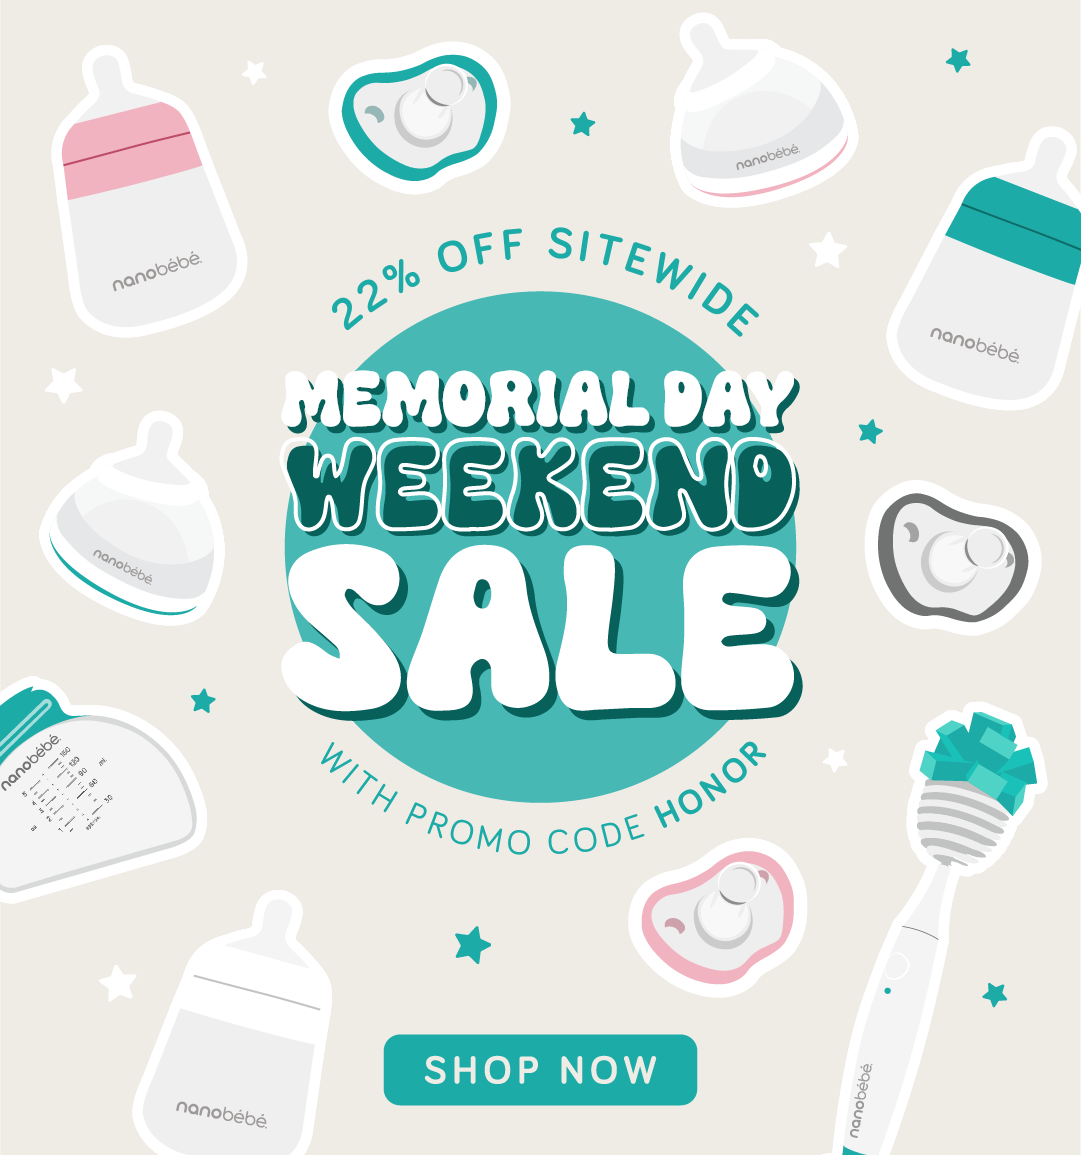 22% off site wide! Memorial day weekend sale! Use code HONOR at checkout.